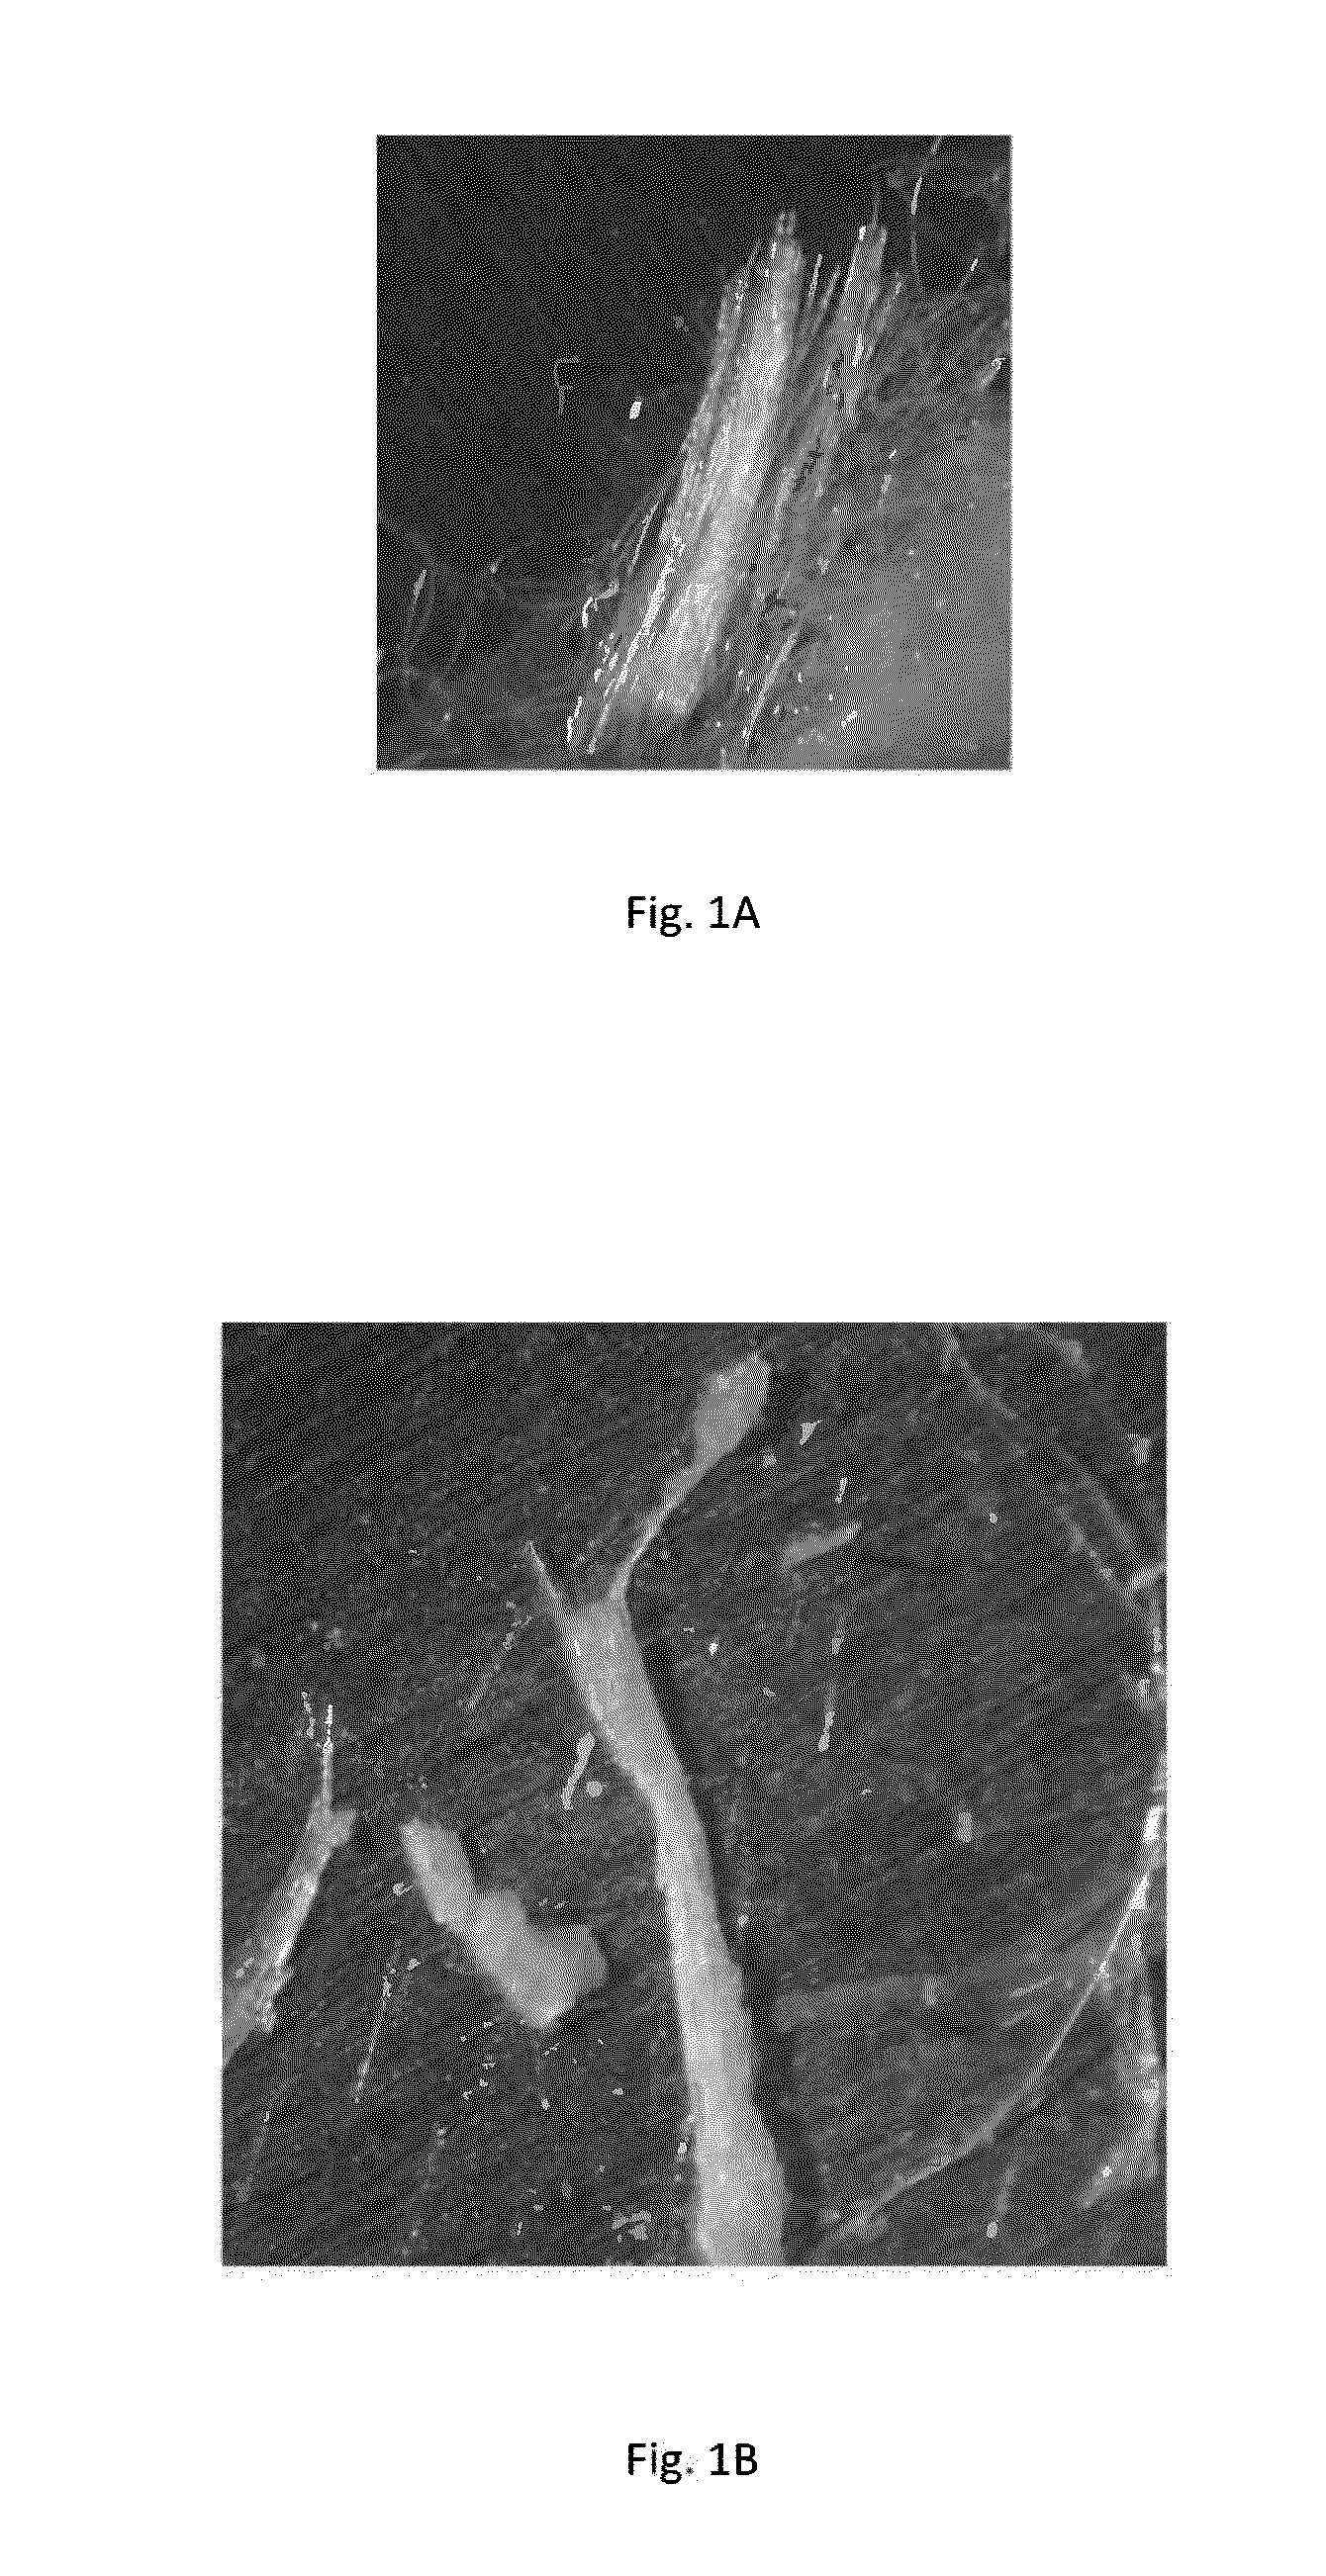 3-mode blended fibers in an engineered cementitious composite